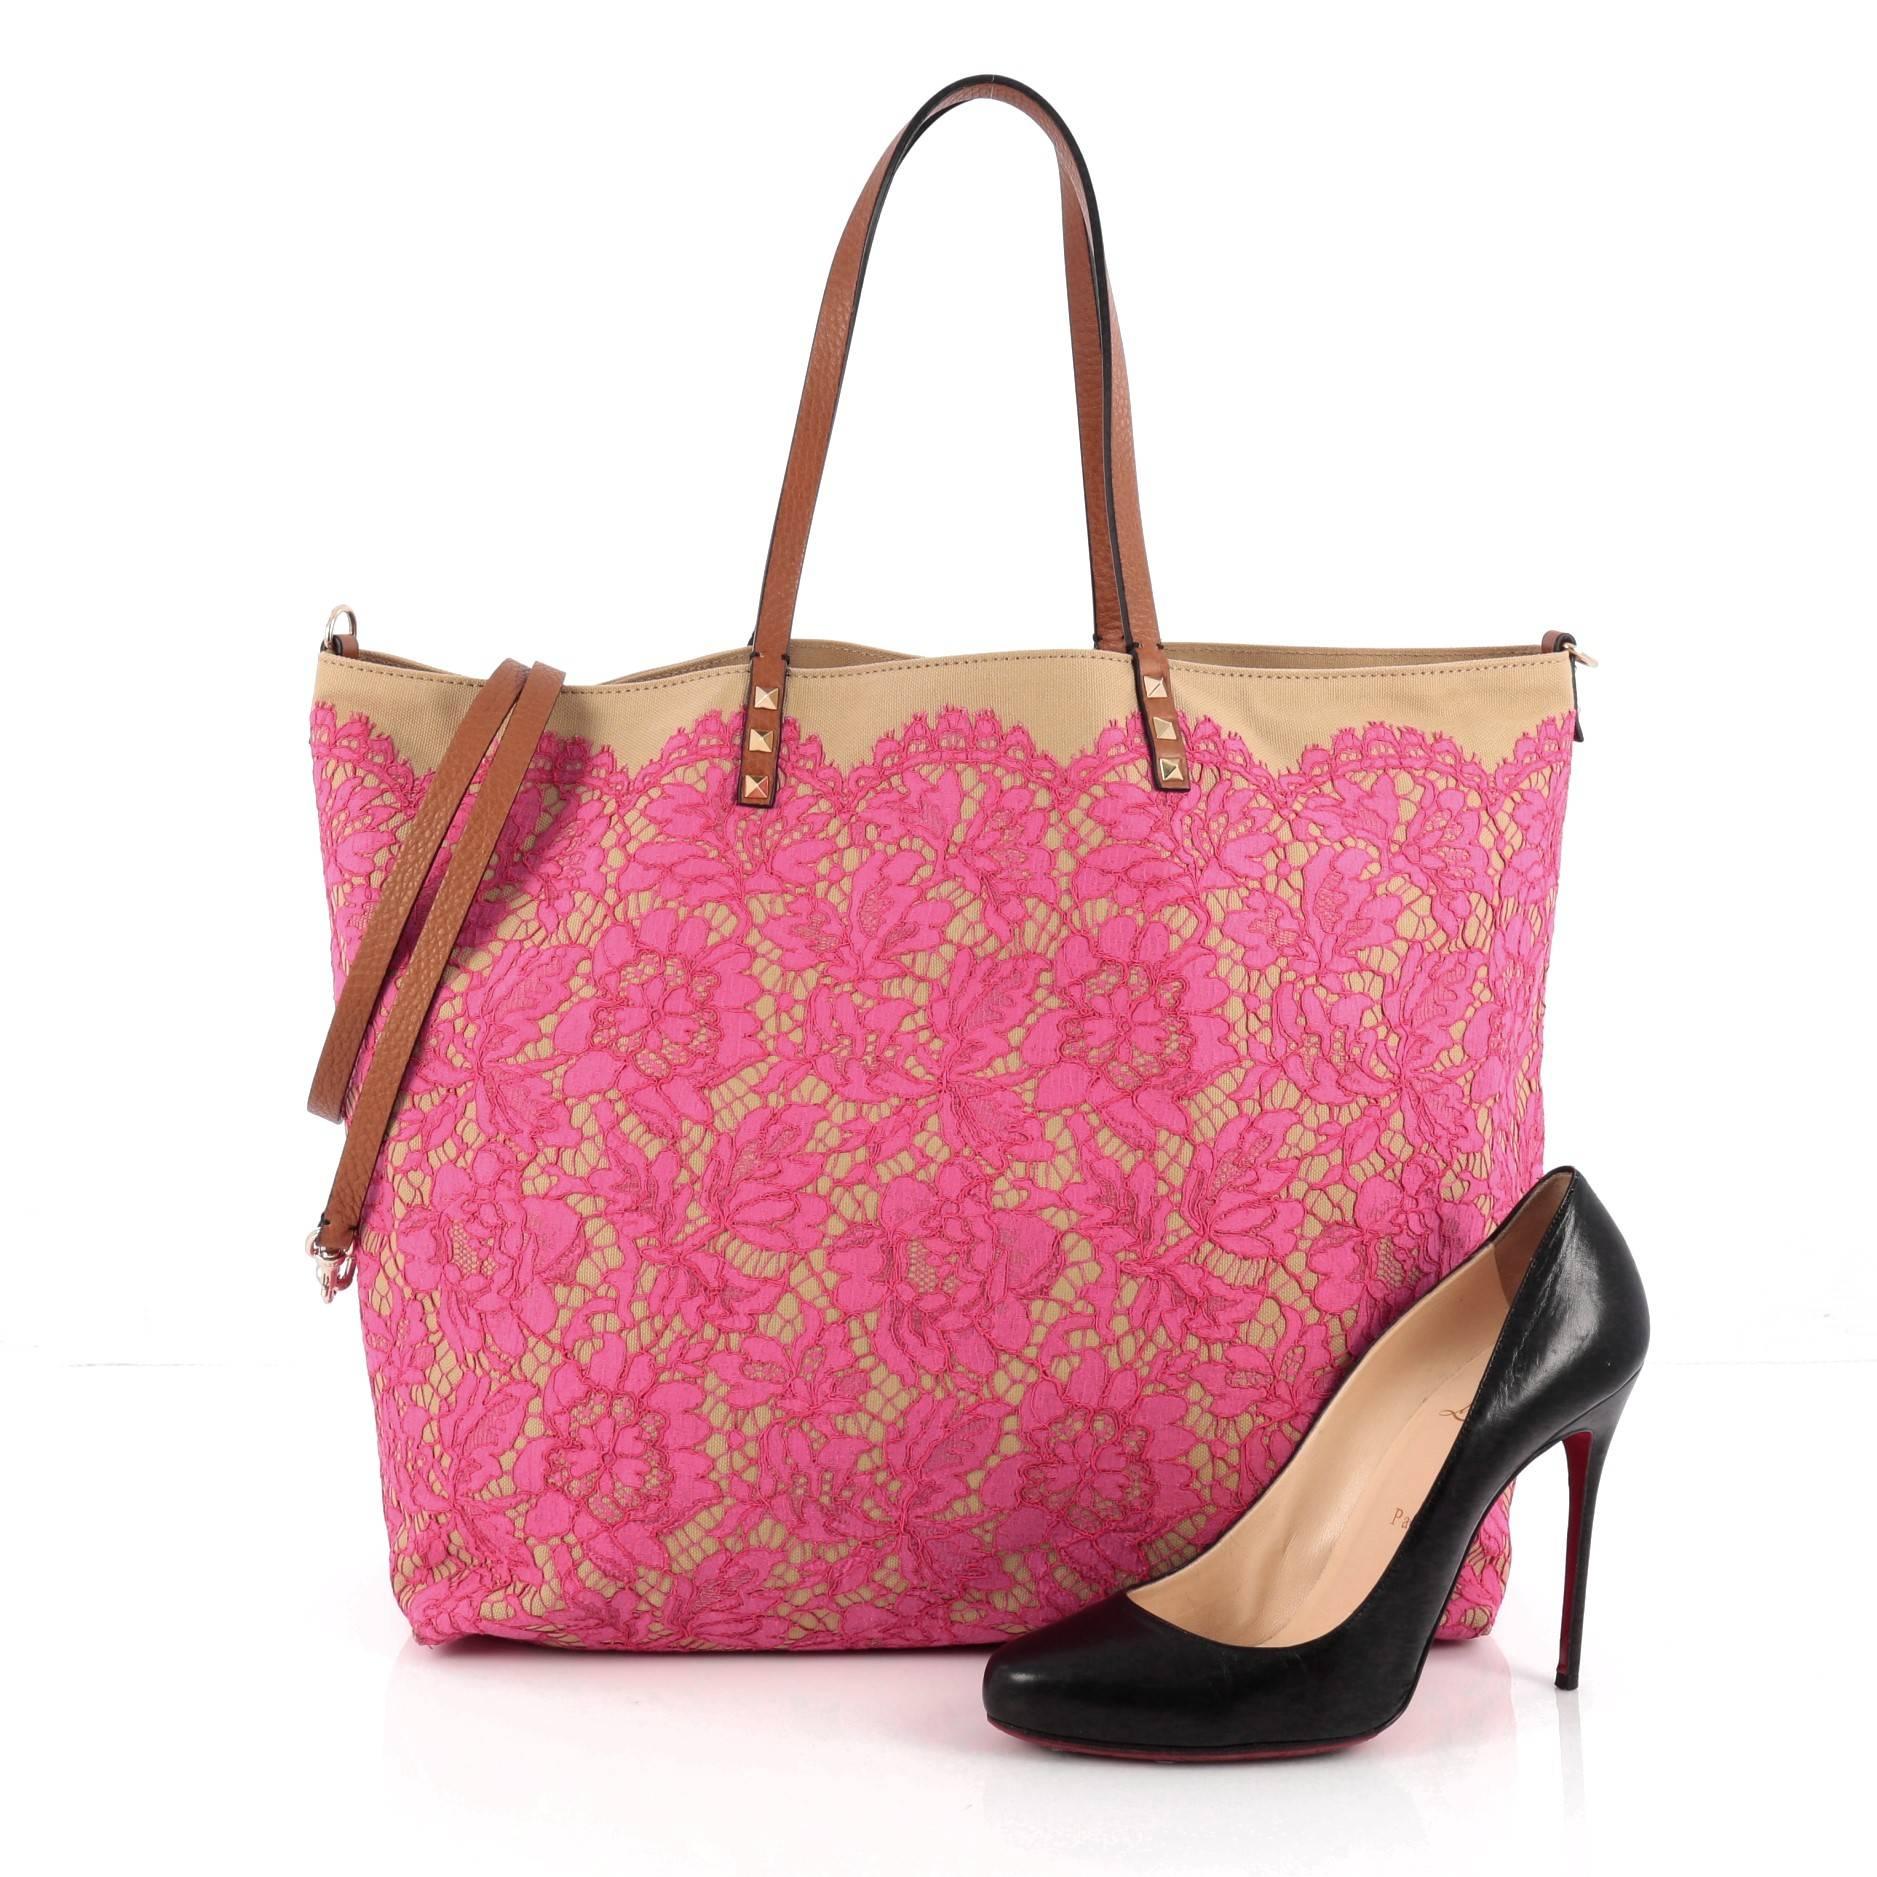 This authentic Valentino Glam Rockstud Reversible Tote Lace and Canvas displays an unexpected touch of romance to a spacious tote. Crafted from reversible beige canvas with pink lace overlay, this feminine bag features dual slim leather handles with